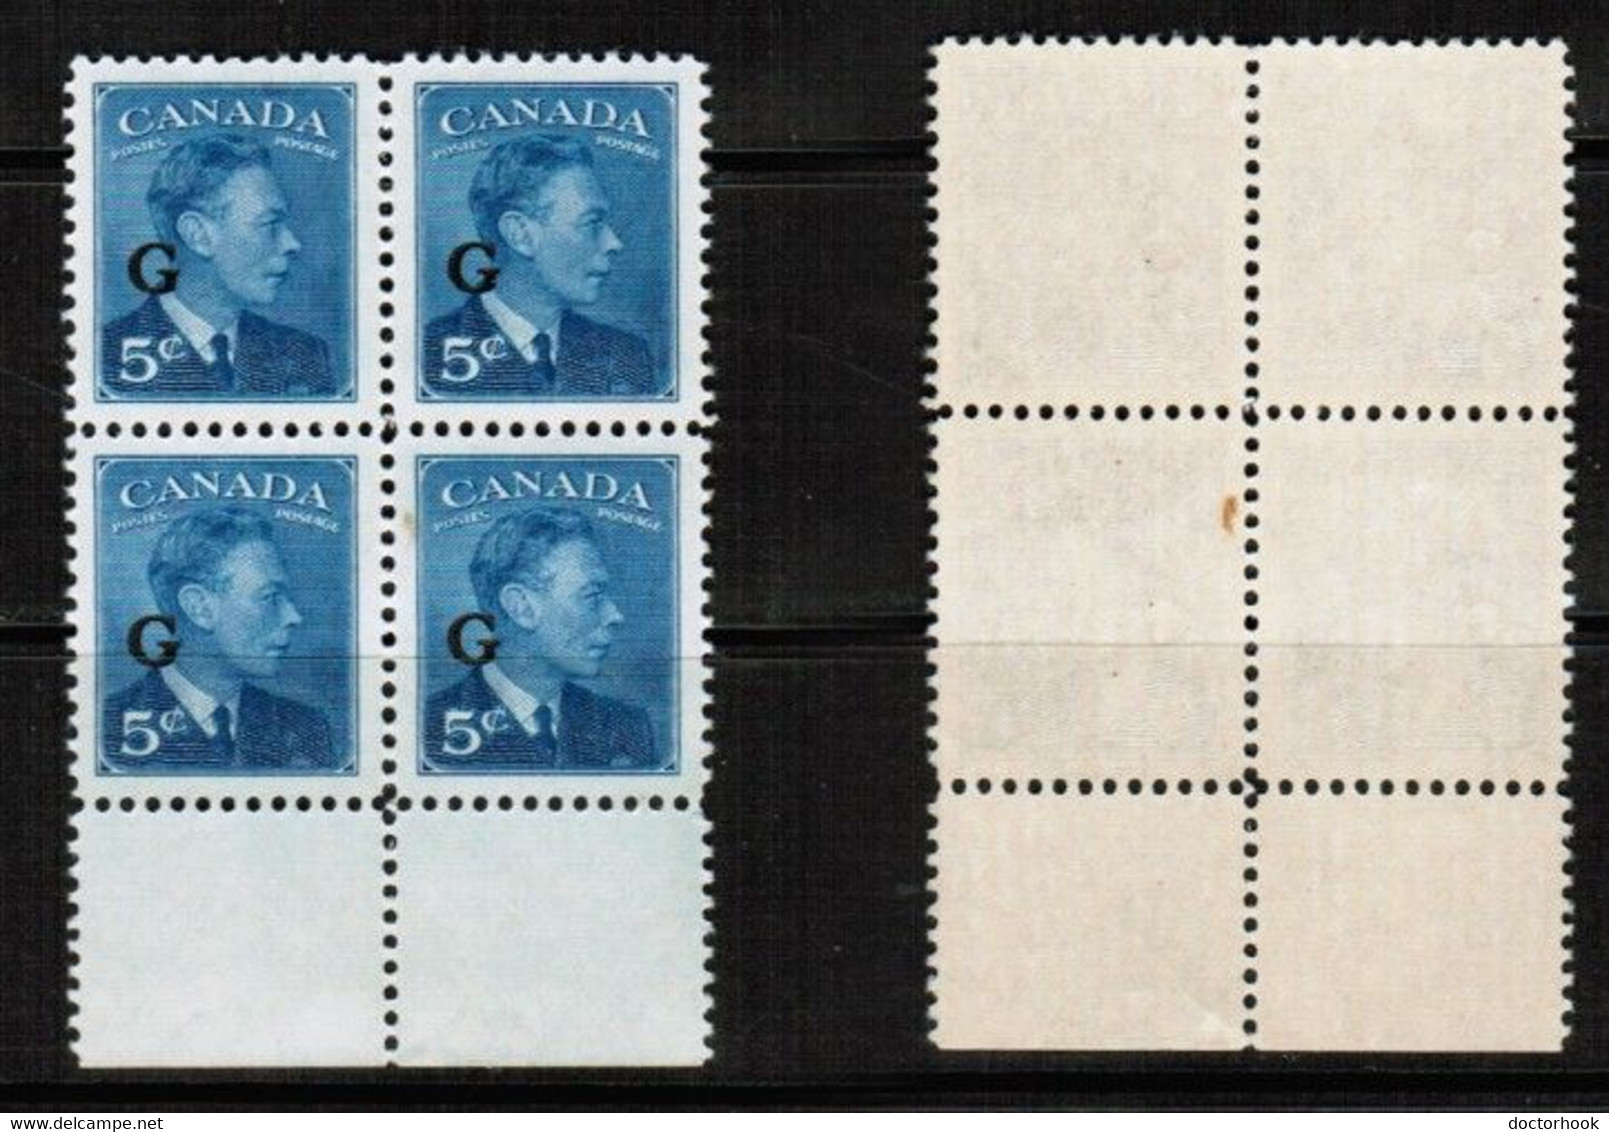 CANADA   Scott # O 20** MINT NH BLOCK OF 4 CONDITION AS PER SCAN (LG-1448) - Overprinted